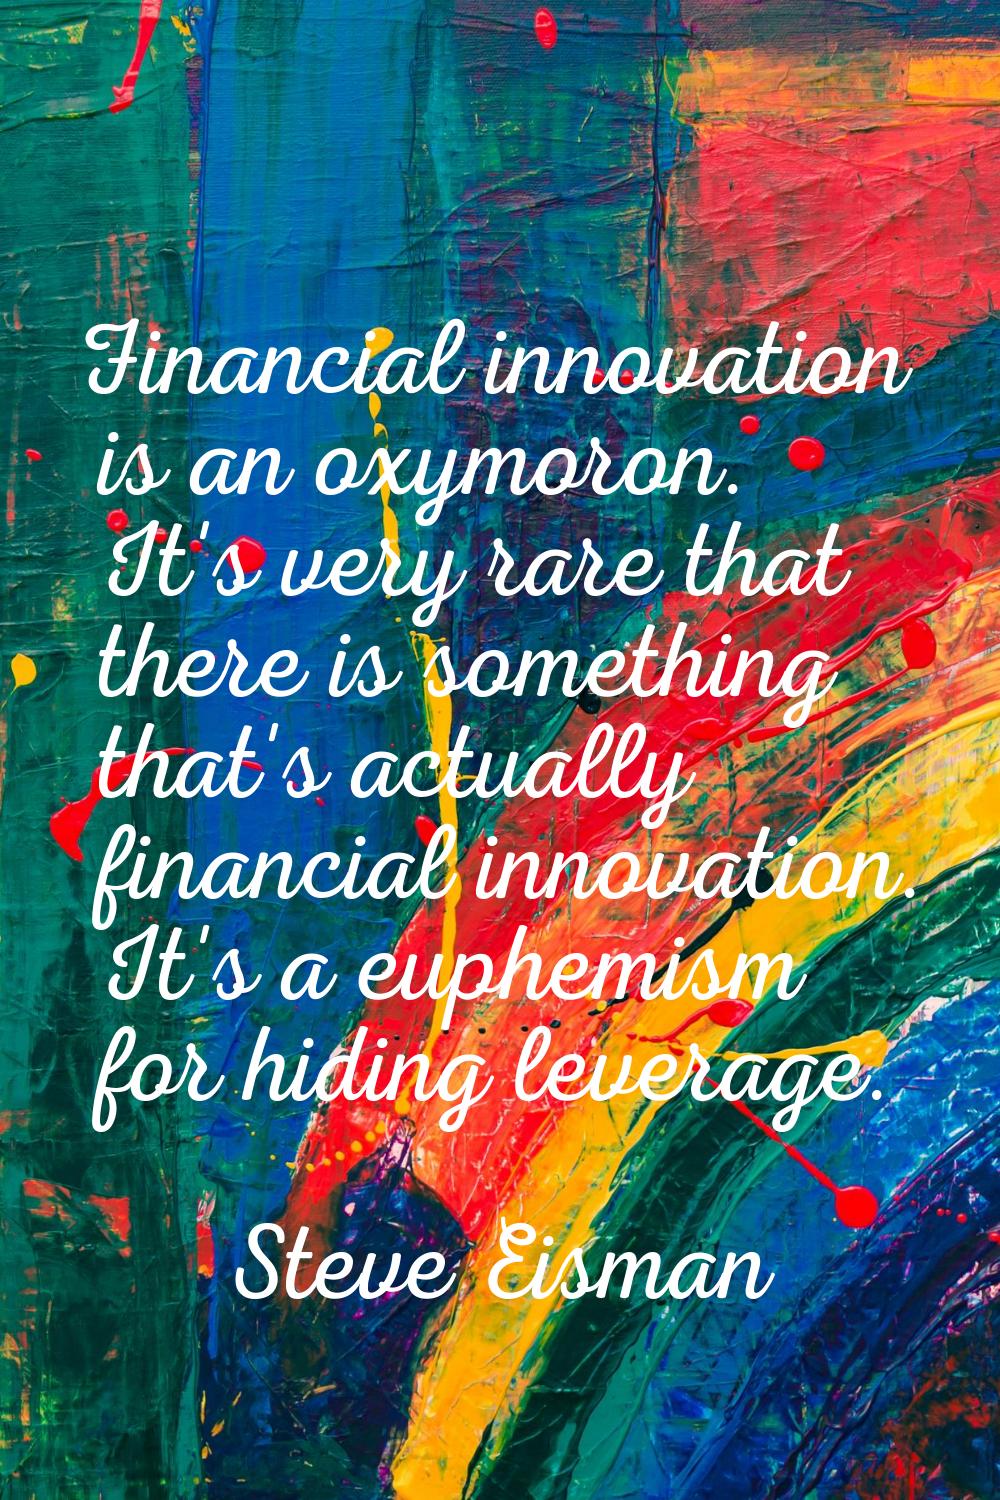 Financial innovation is an oxymoron. It's very rare that there is something that's actually financi